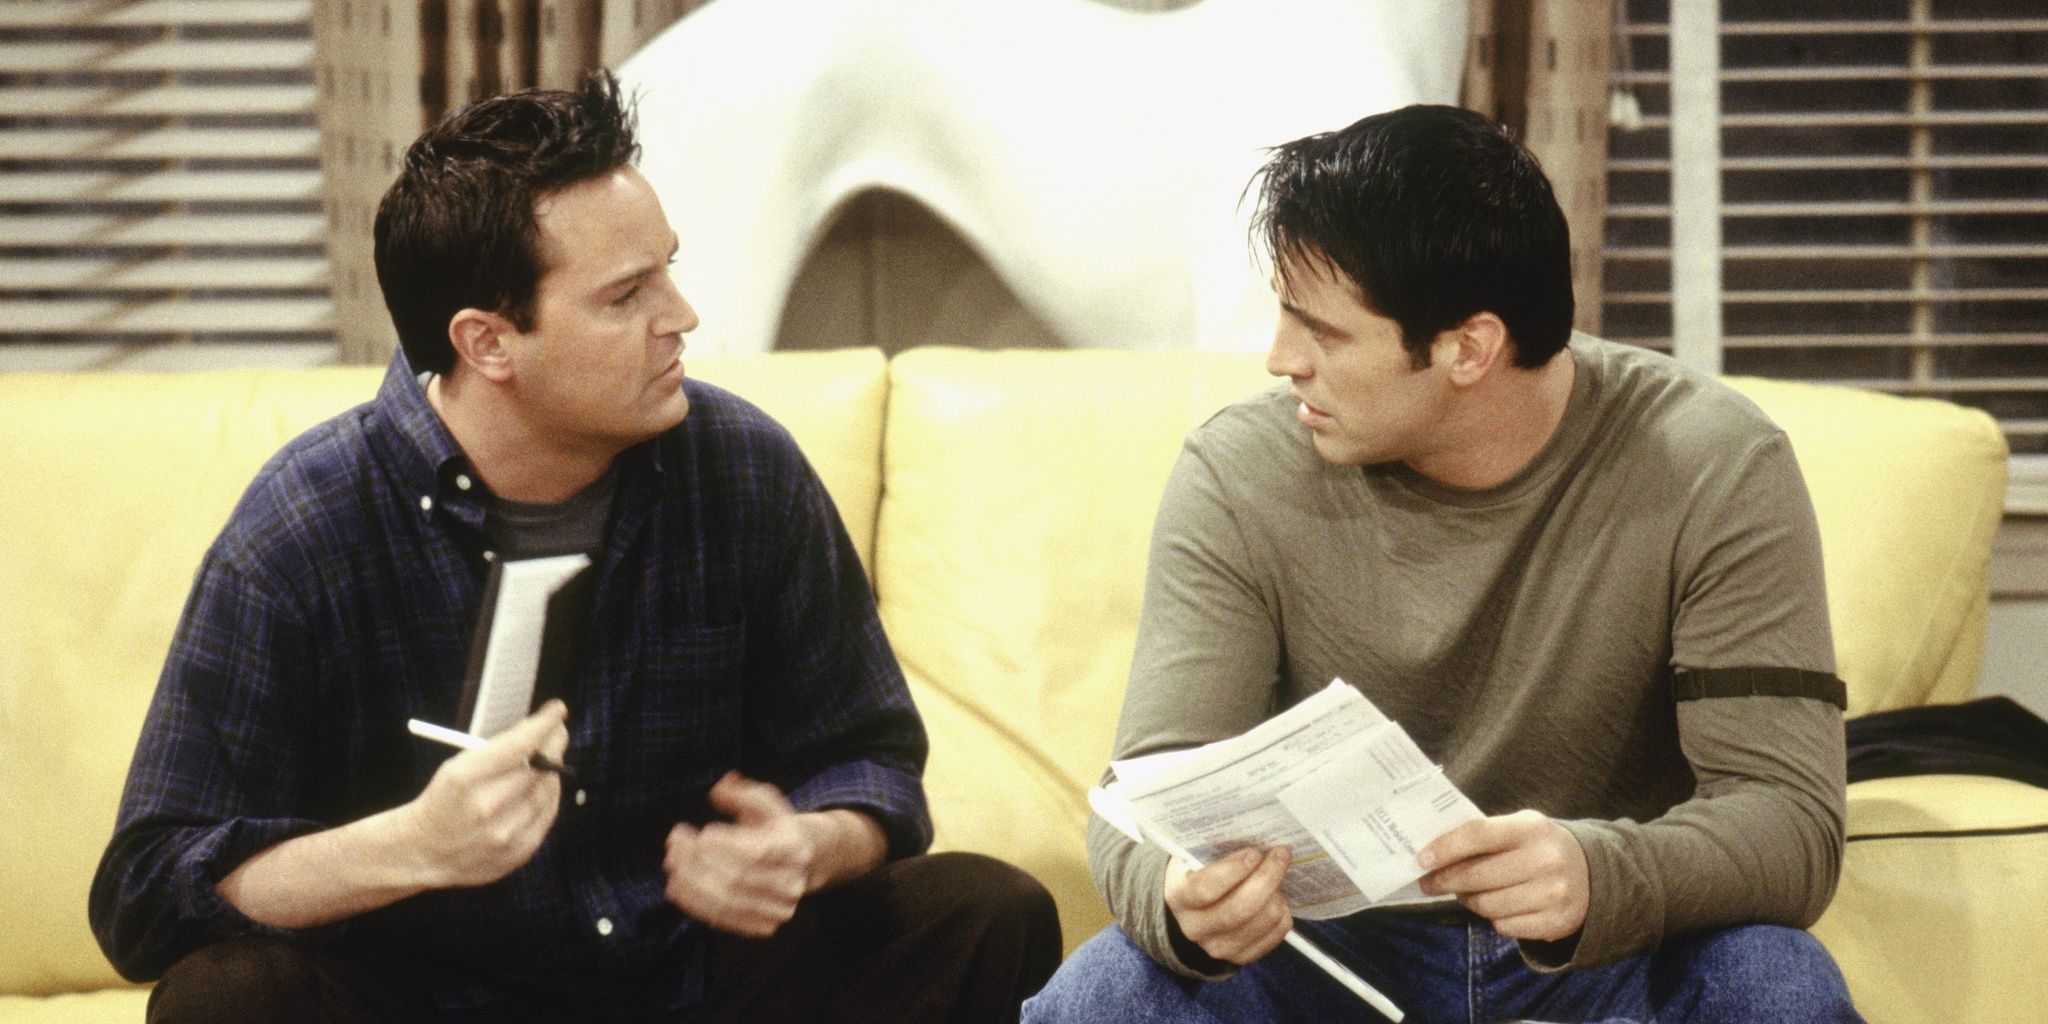 Joey and Chandler sitting on the couch in Friends.